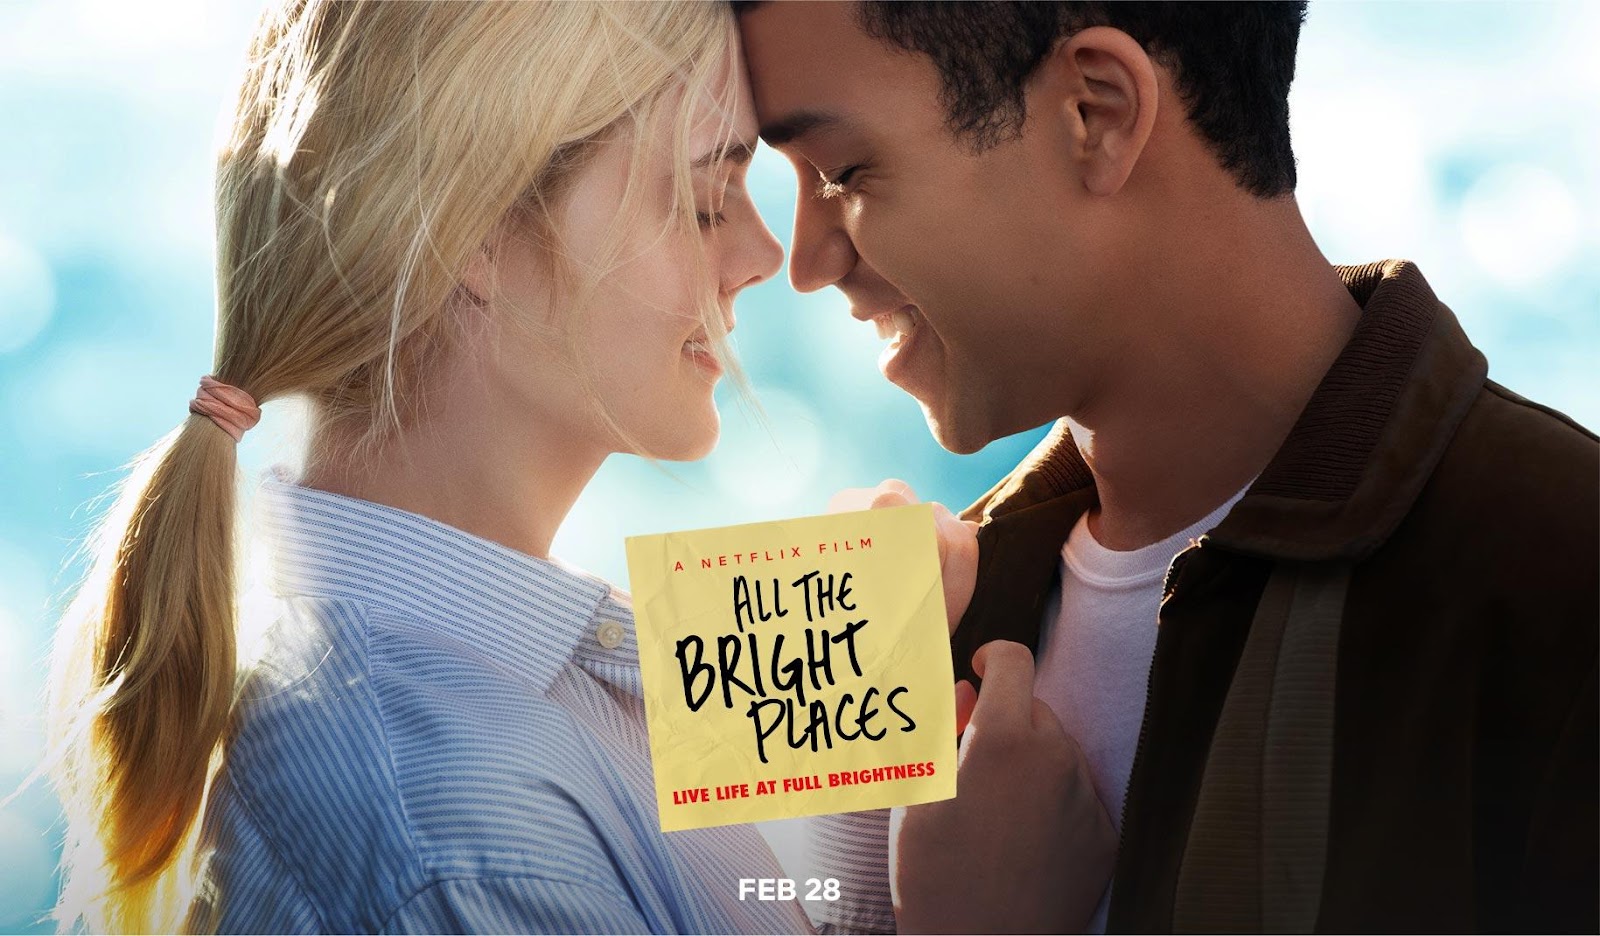 5. All The Bright Places